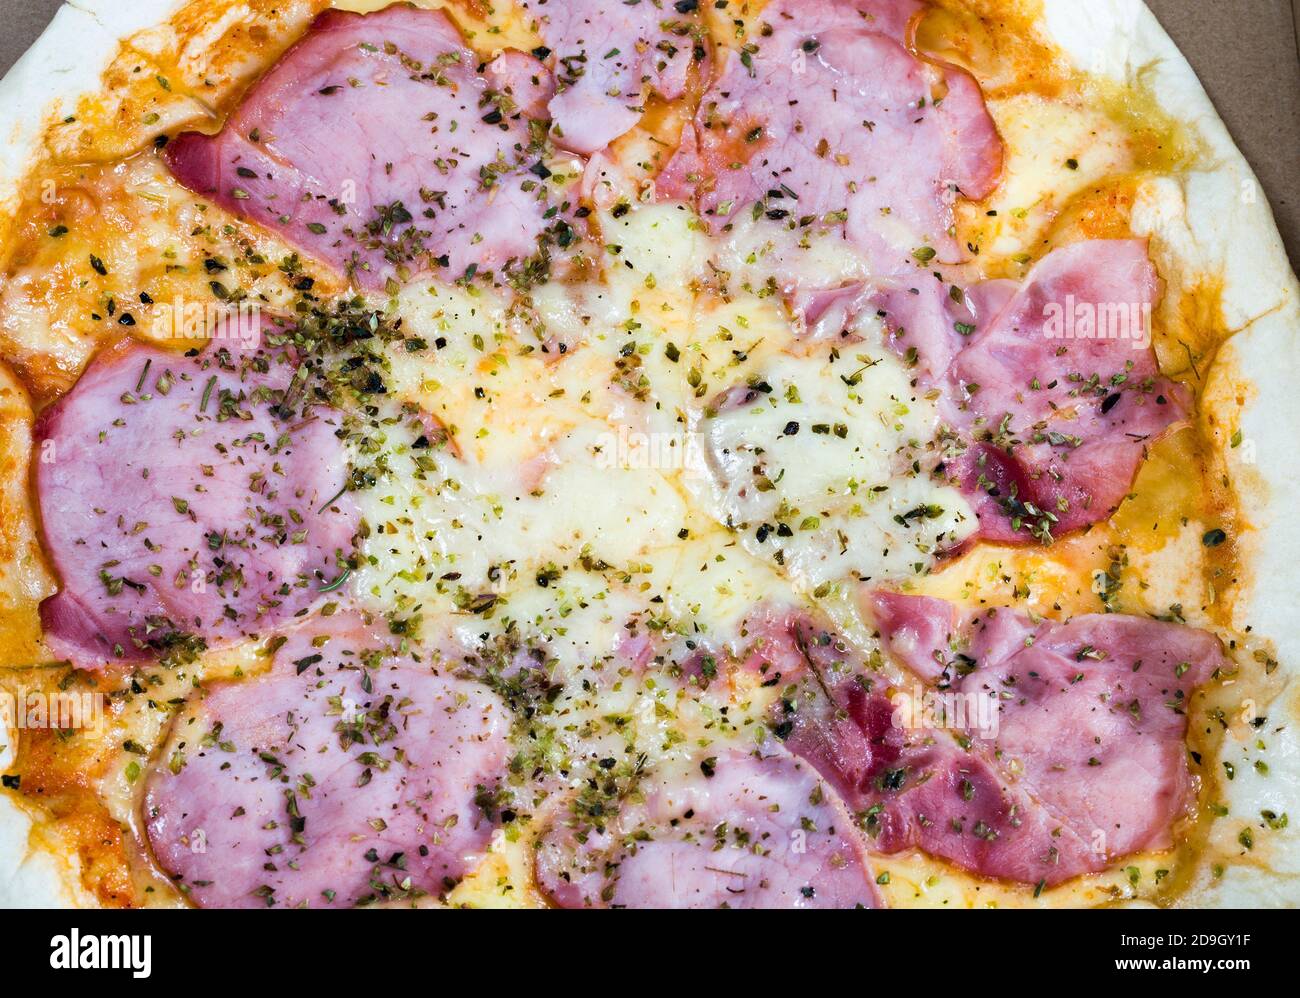 one pizza stuffed with ham, cheese Stock Photo